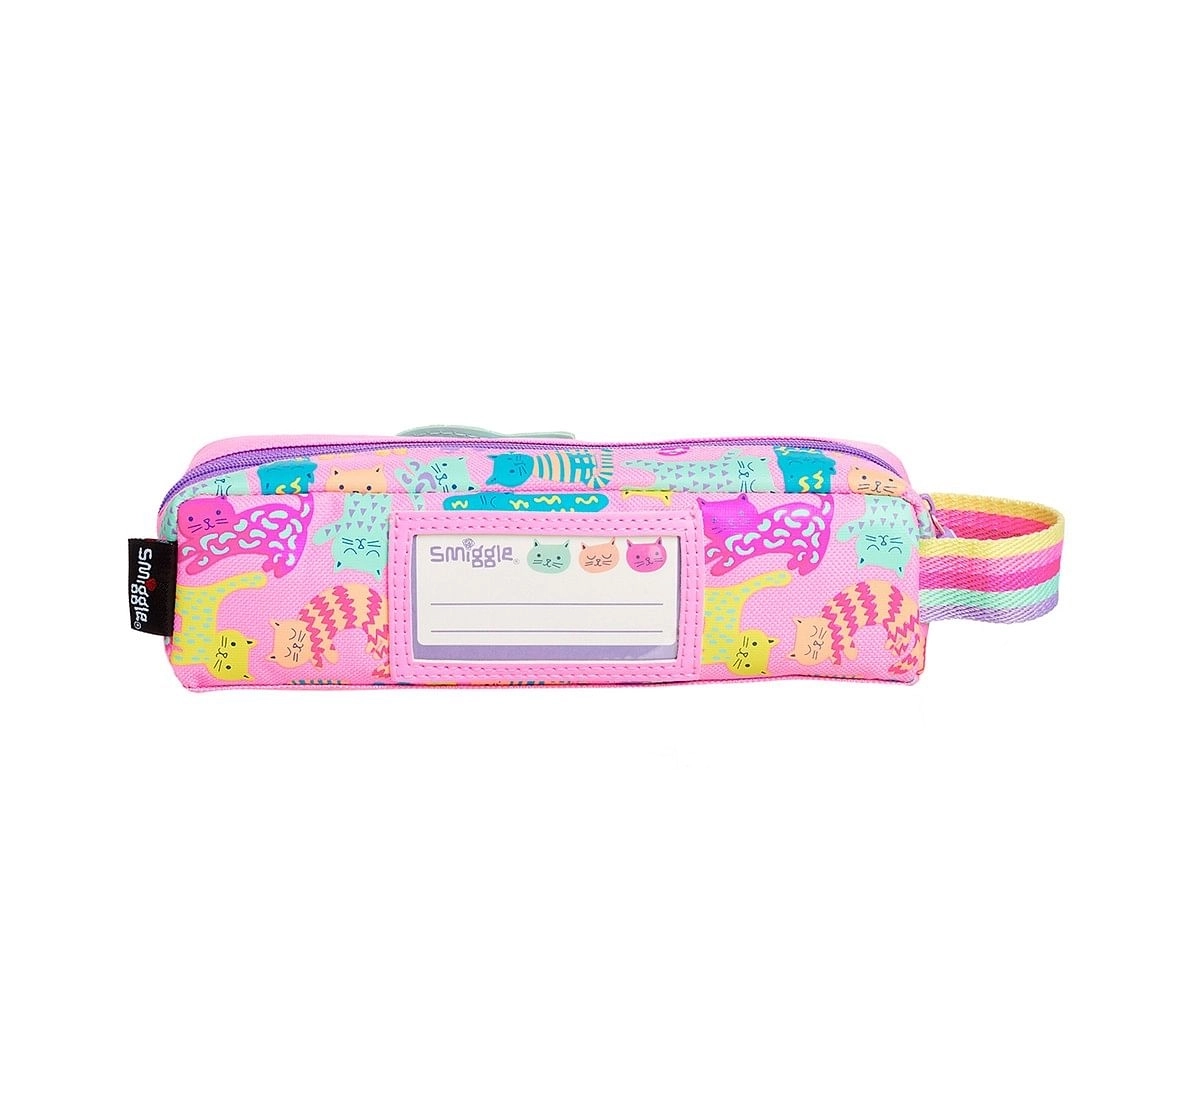 Smiggle Topsy Teeny Tiny Pencil Case - Cat Print Bags for Kids age 3Y+ (Pink)